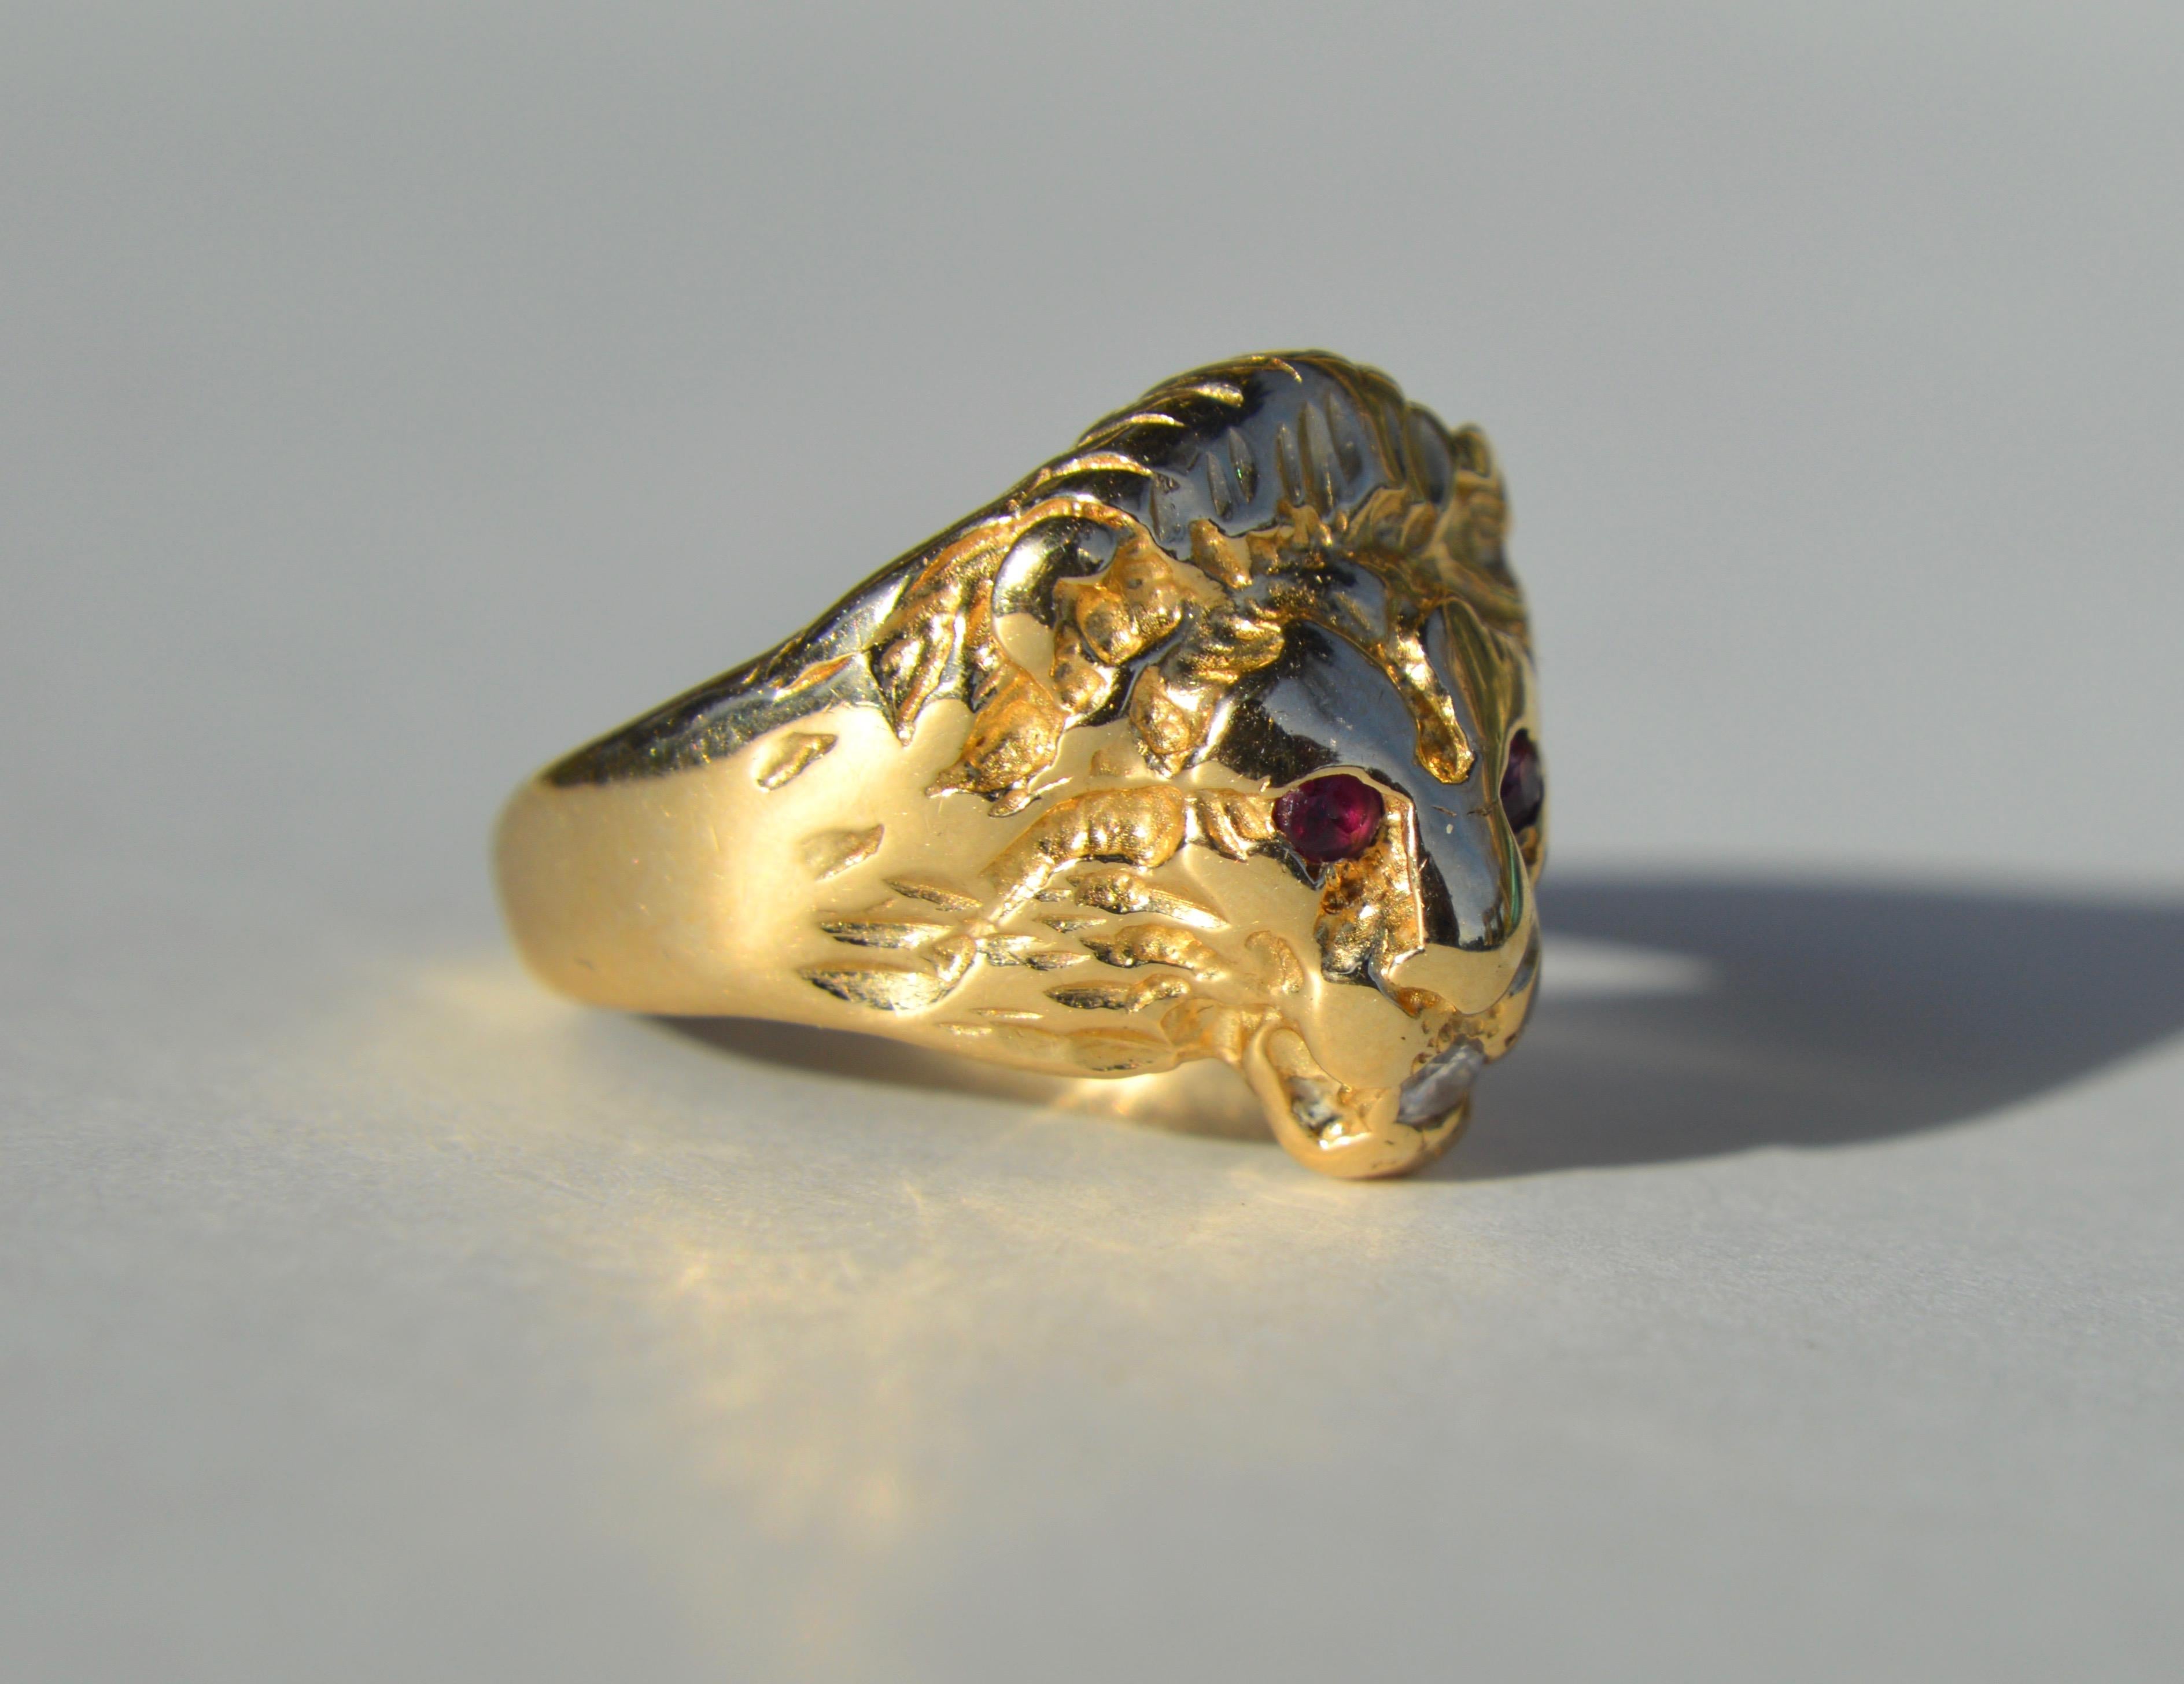 Beautiful vintage circa 1970s 14K yellow gold with diamond and ruby lion cocktail statement ring. Perfect for that Leo in your life. Size 8, can be resized by a jeweler. In very good condition. Ring is unmarked but tested as solid 14K. Lion head